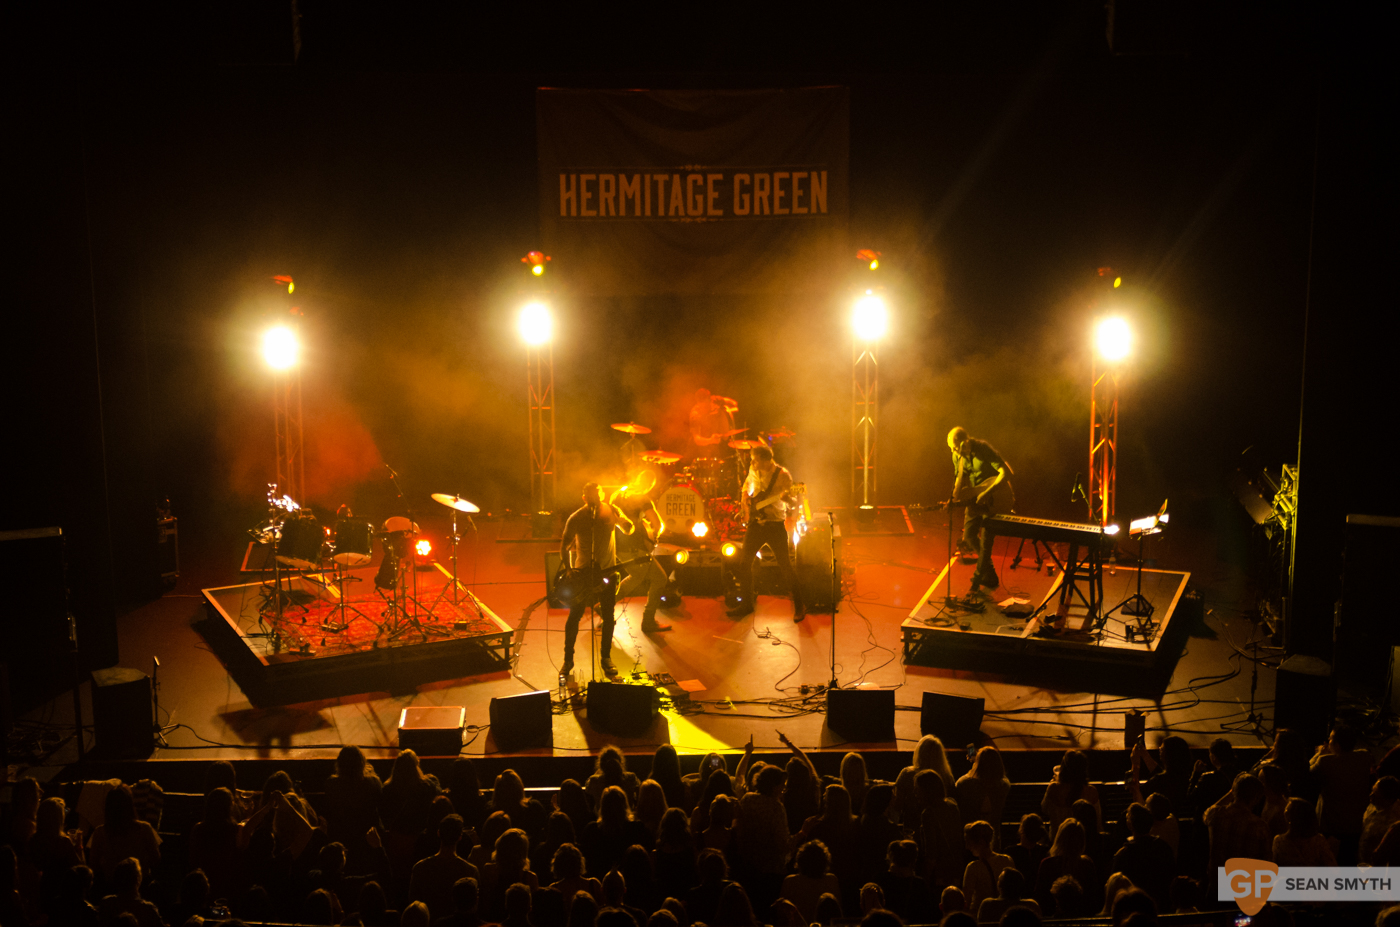 hermitage-green-at-cork-opera-house-by-sean-smyth-8-3-16-29-of-45